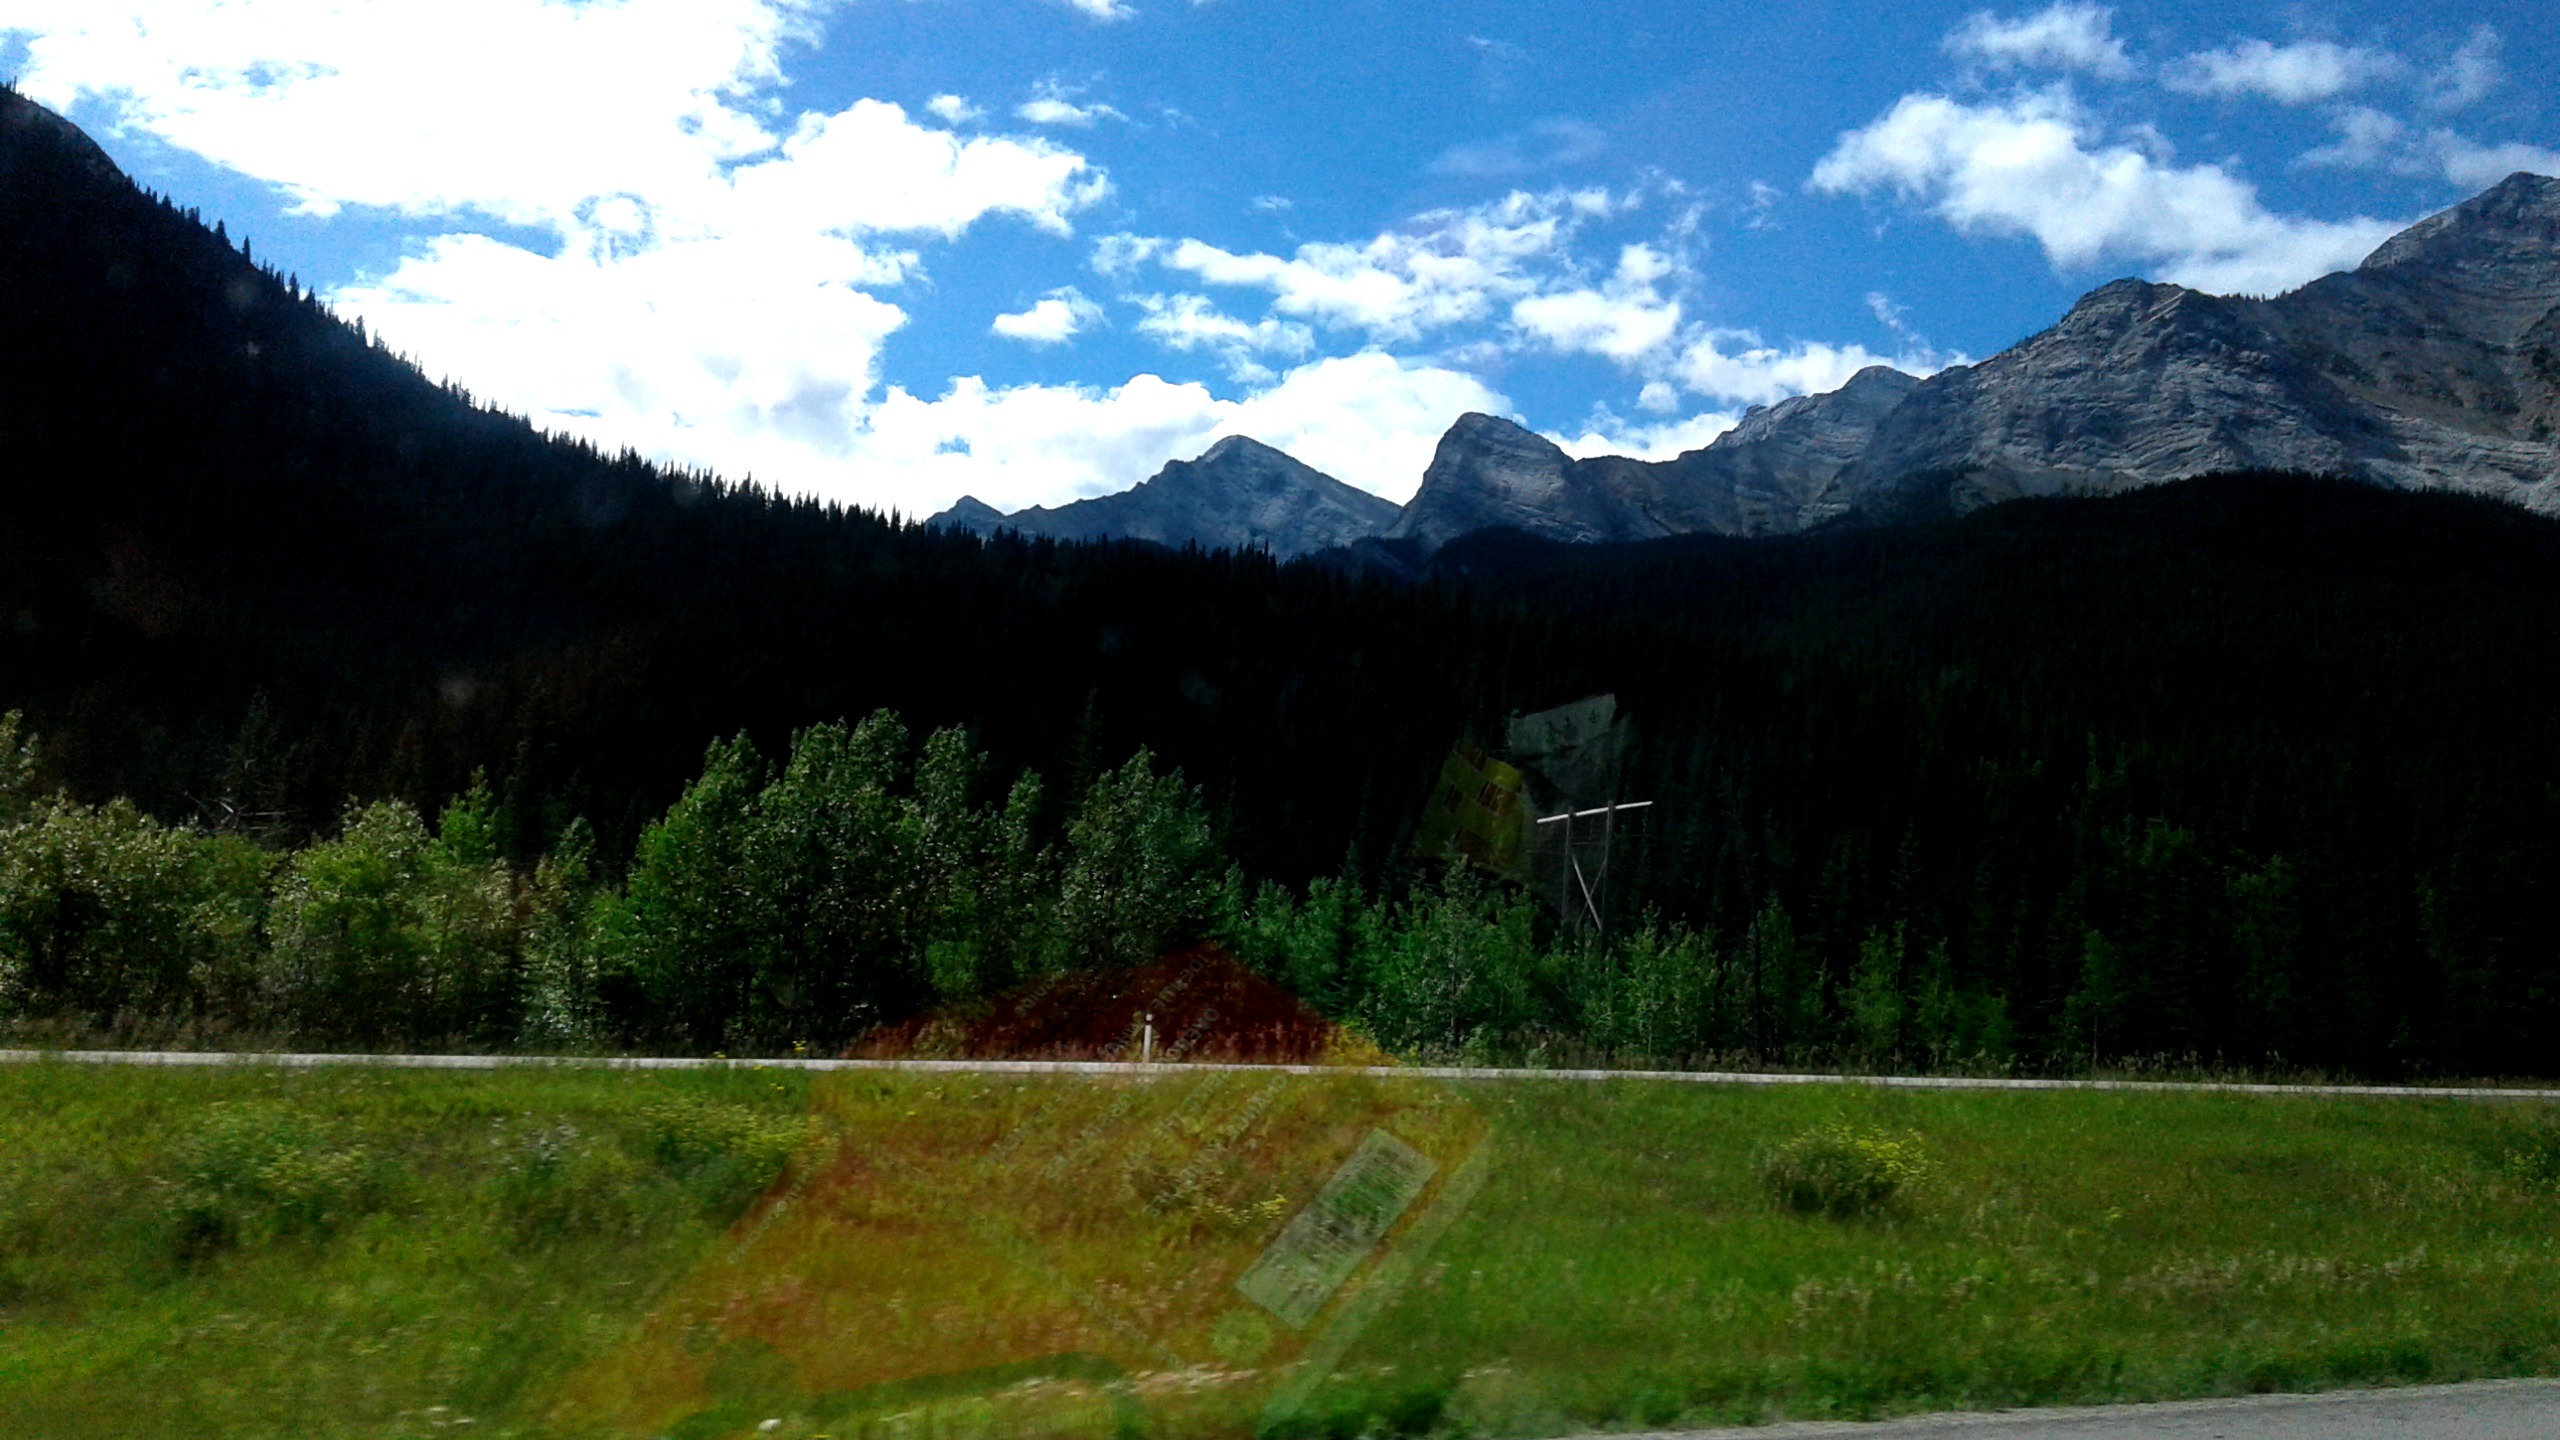 The Road Trip to Vancouver through the Rockies of British Columbia